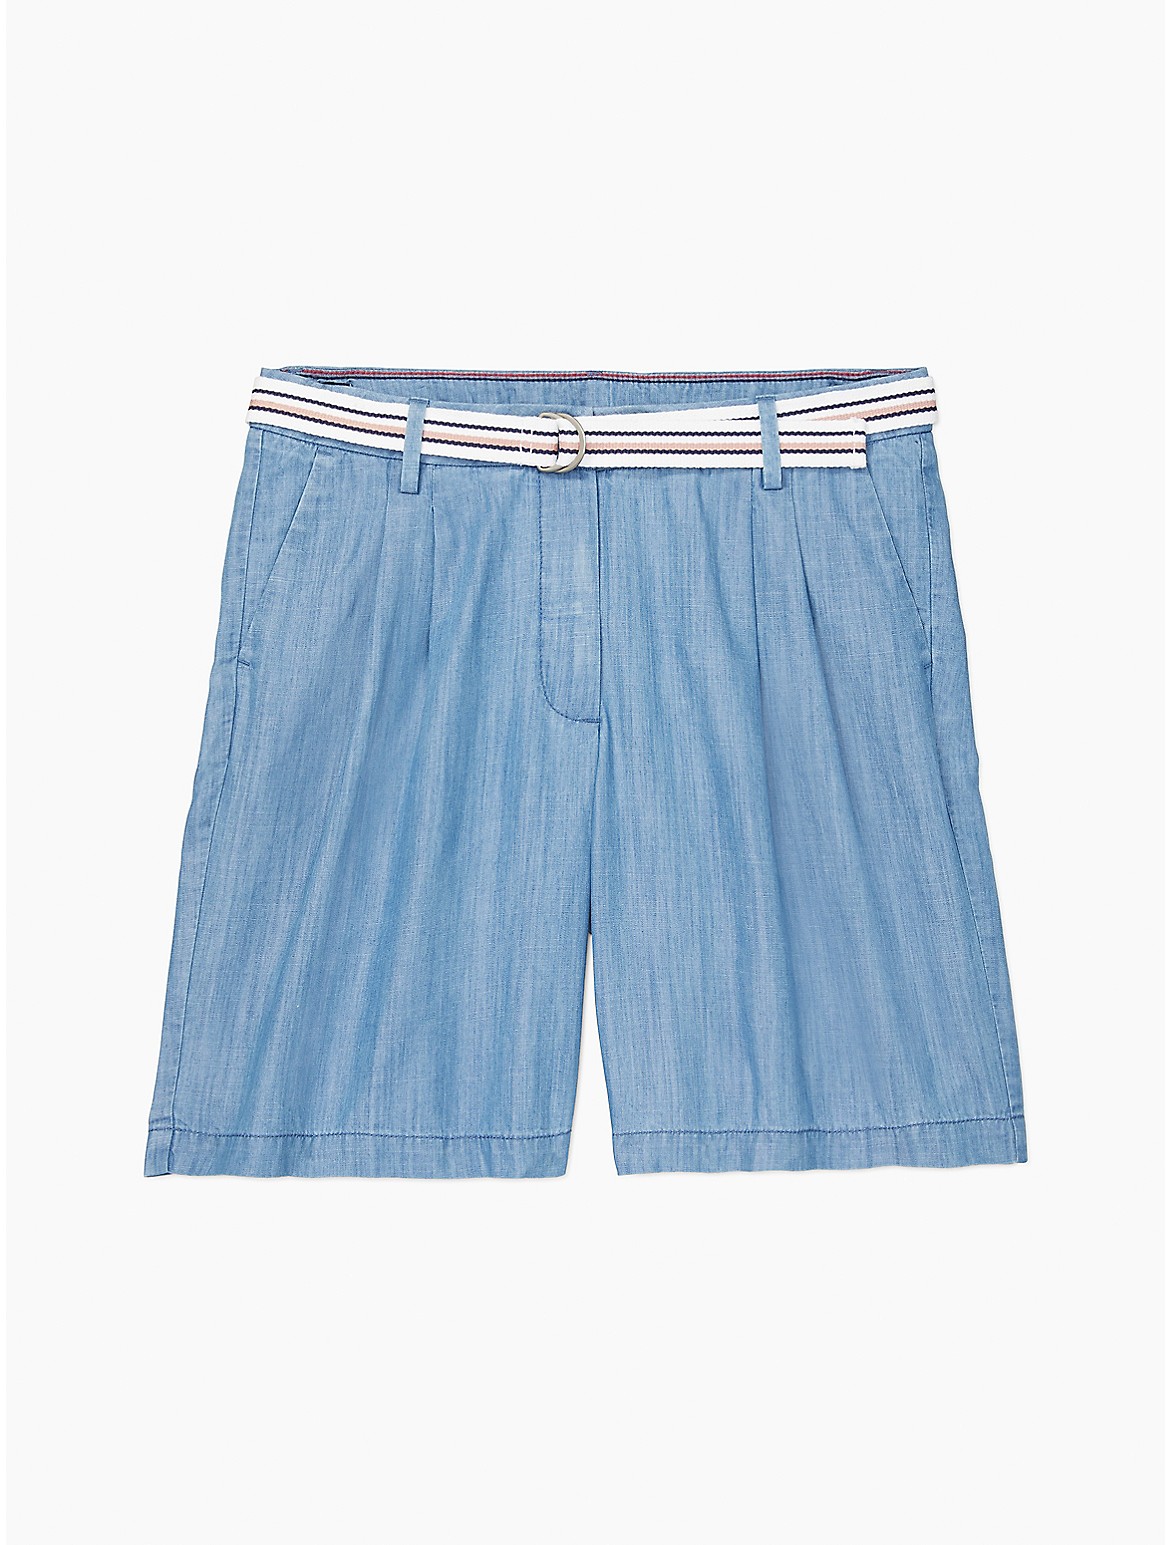 Tommy Hilfiger Seated Fit Chambray Chino Short In Medium Wash